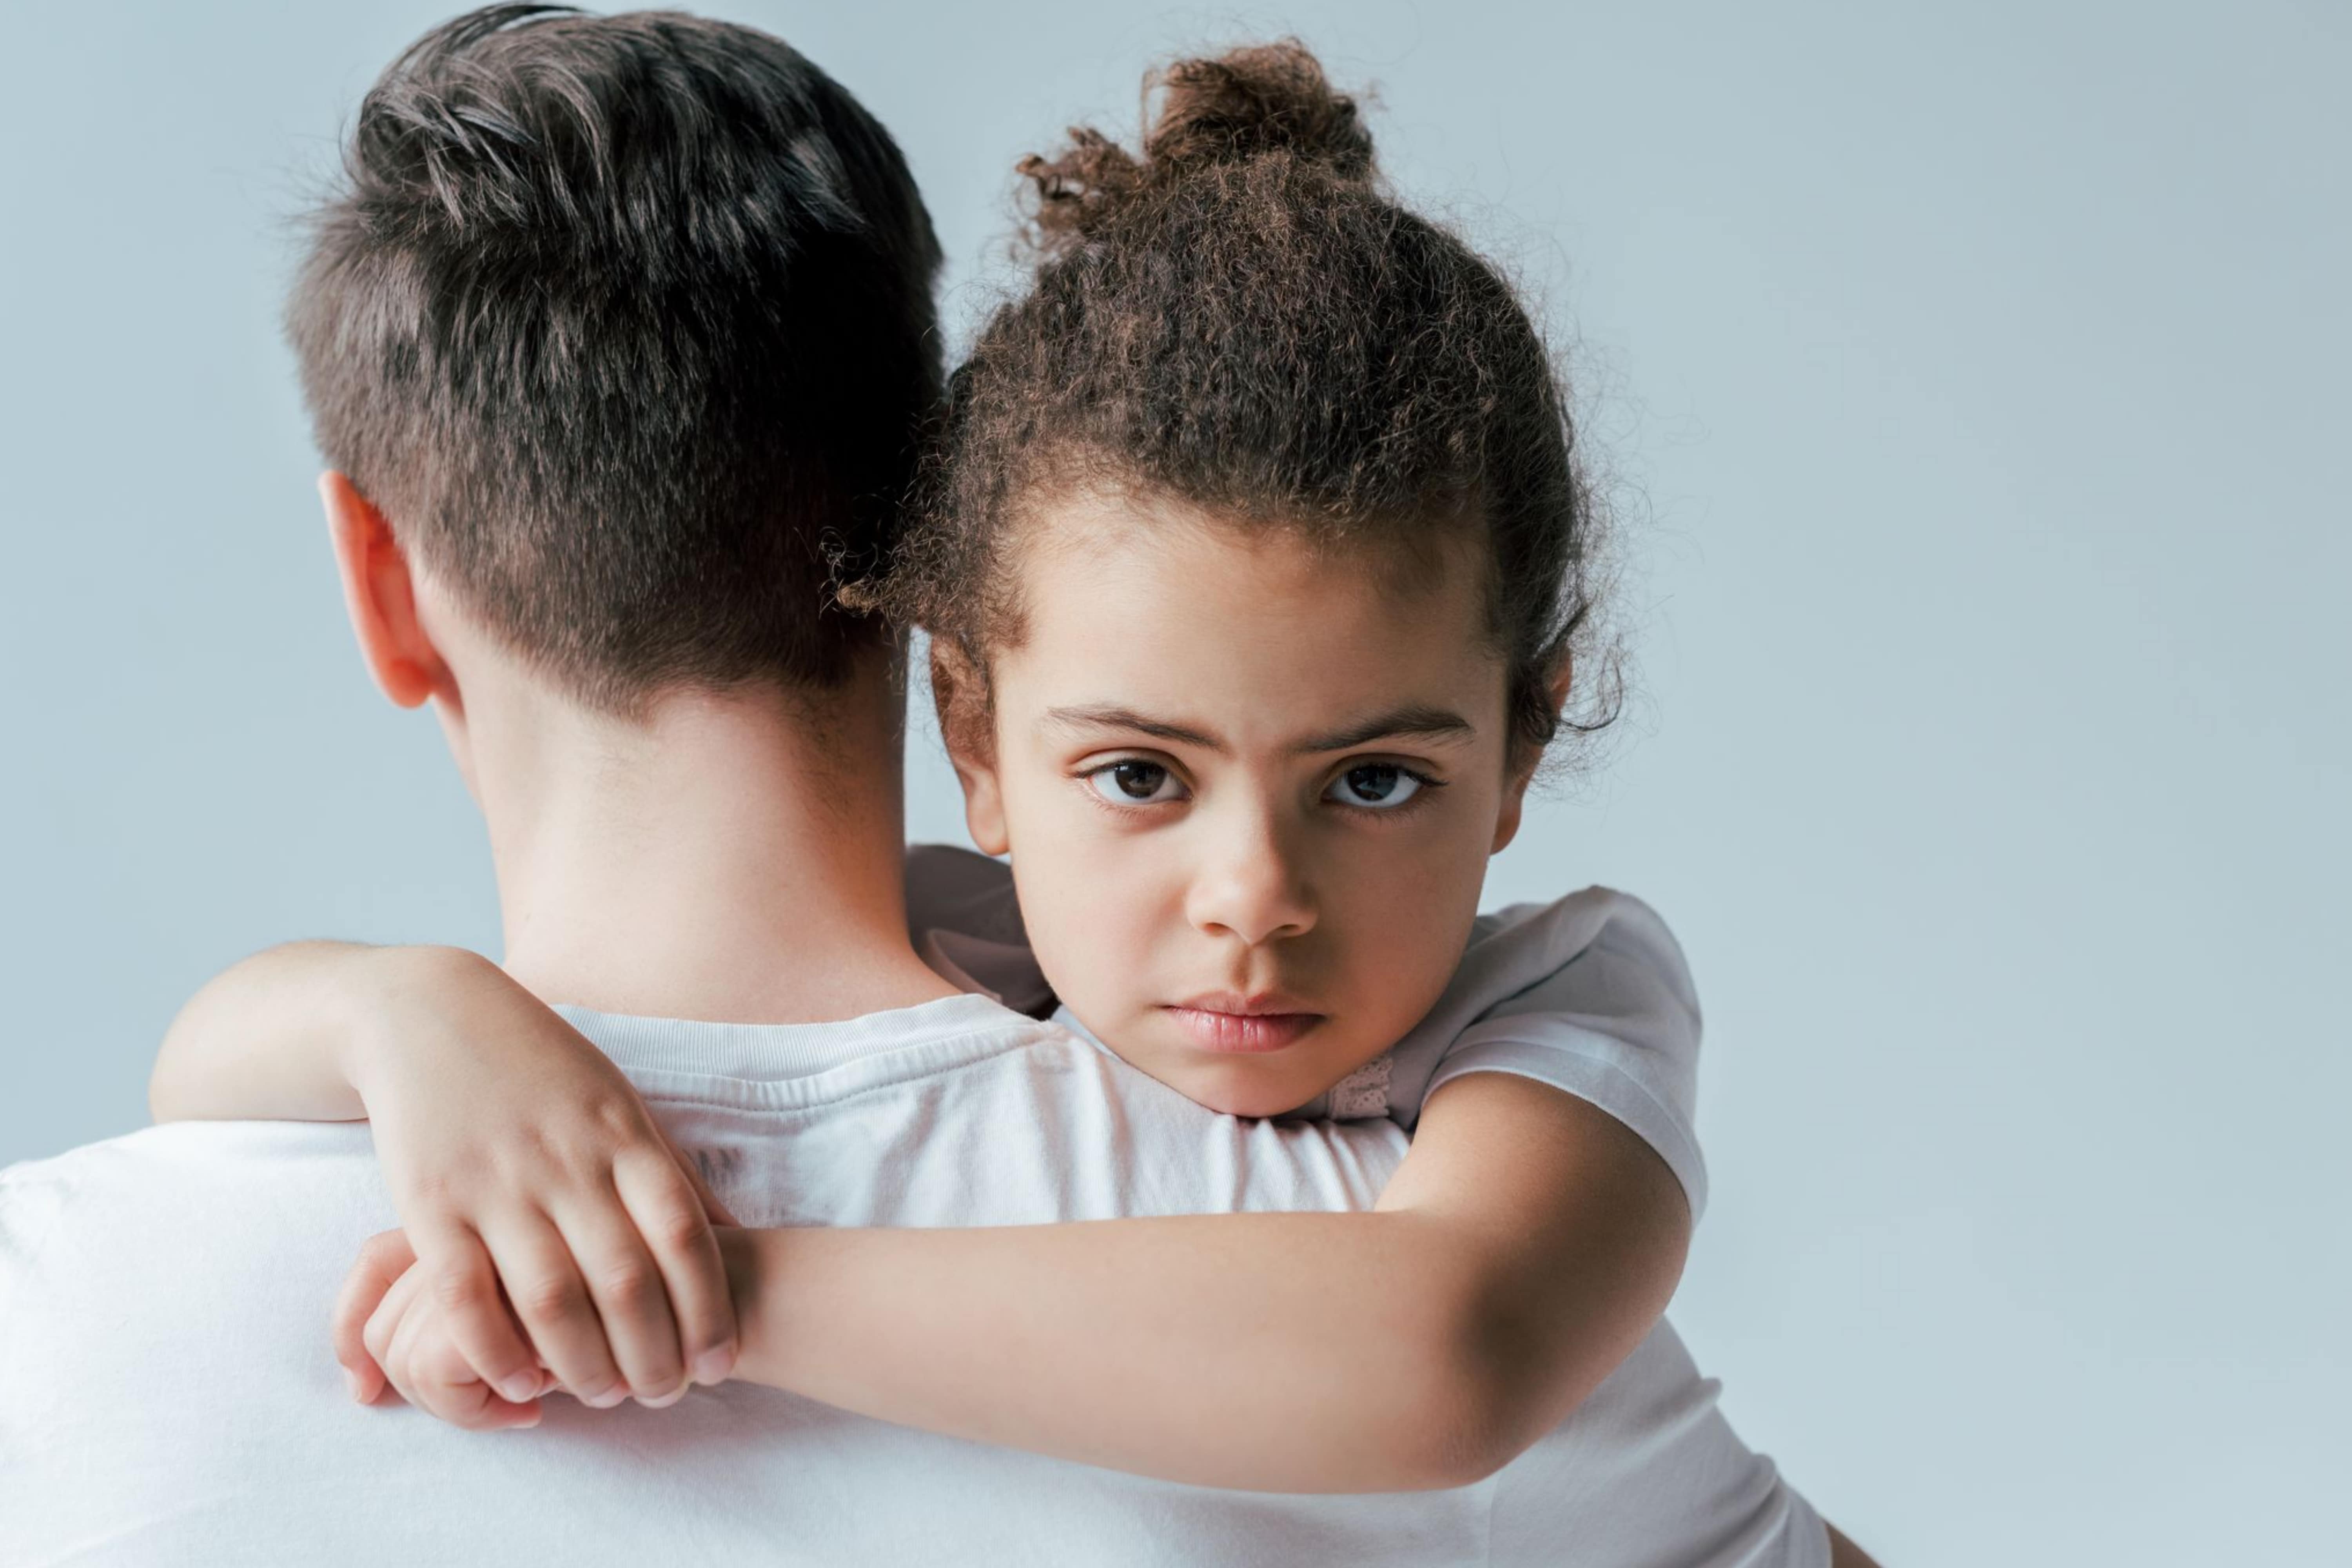 13 Warning Signs of a Toxic Parent